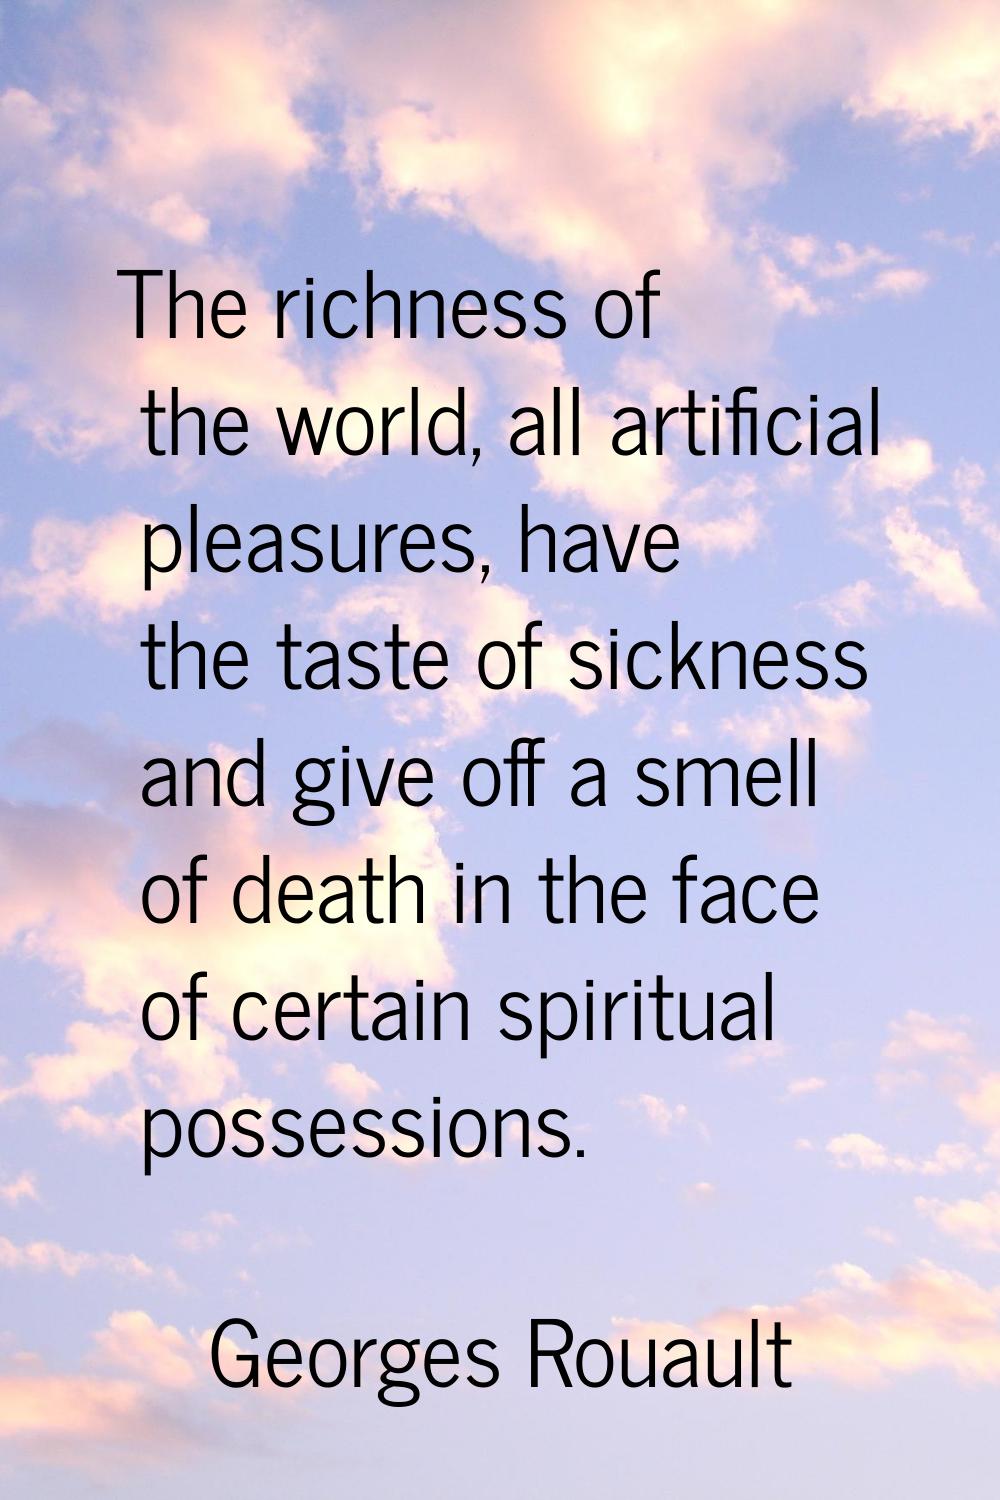 The richness of the world, all artificial pleasures, have the taste of sickness and give off a smel